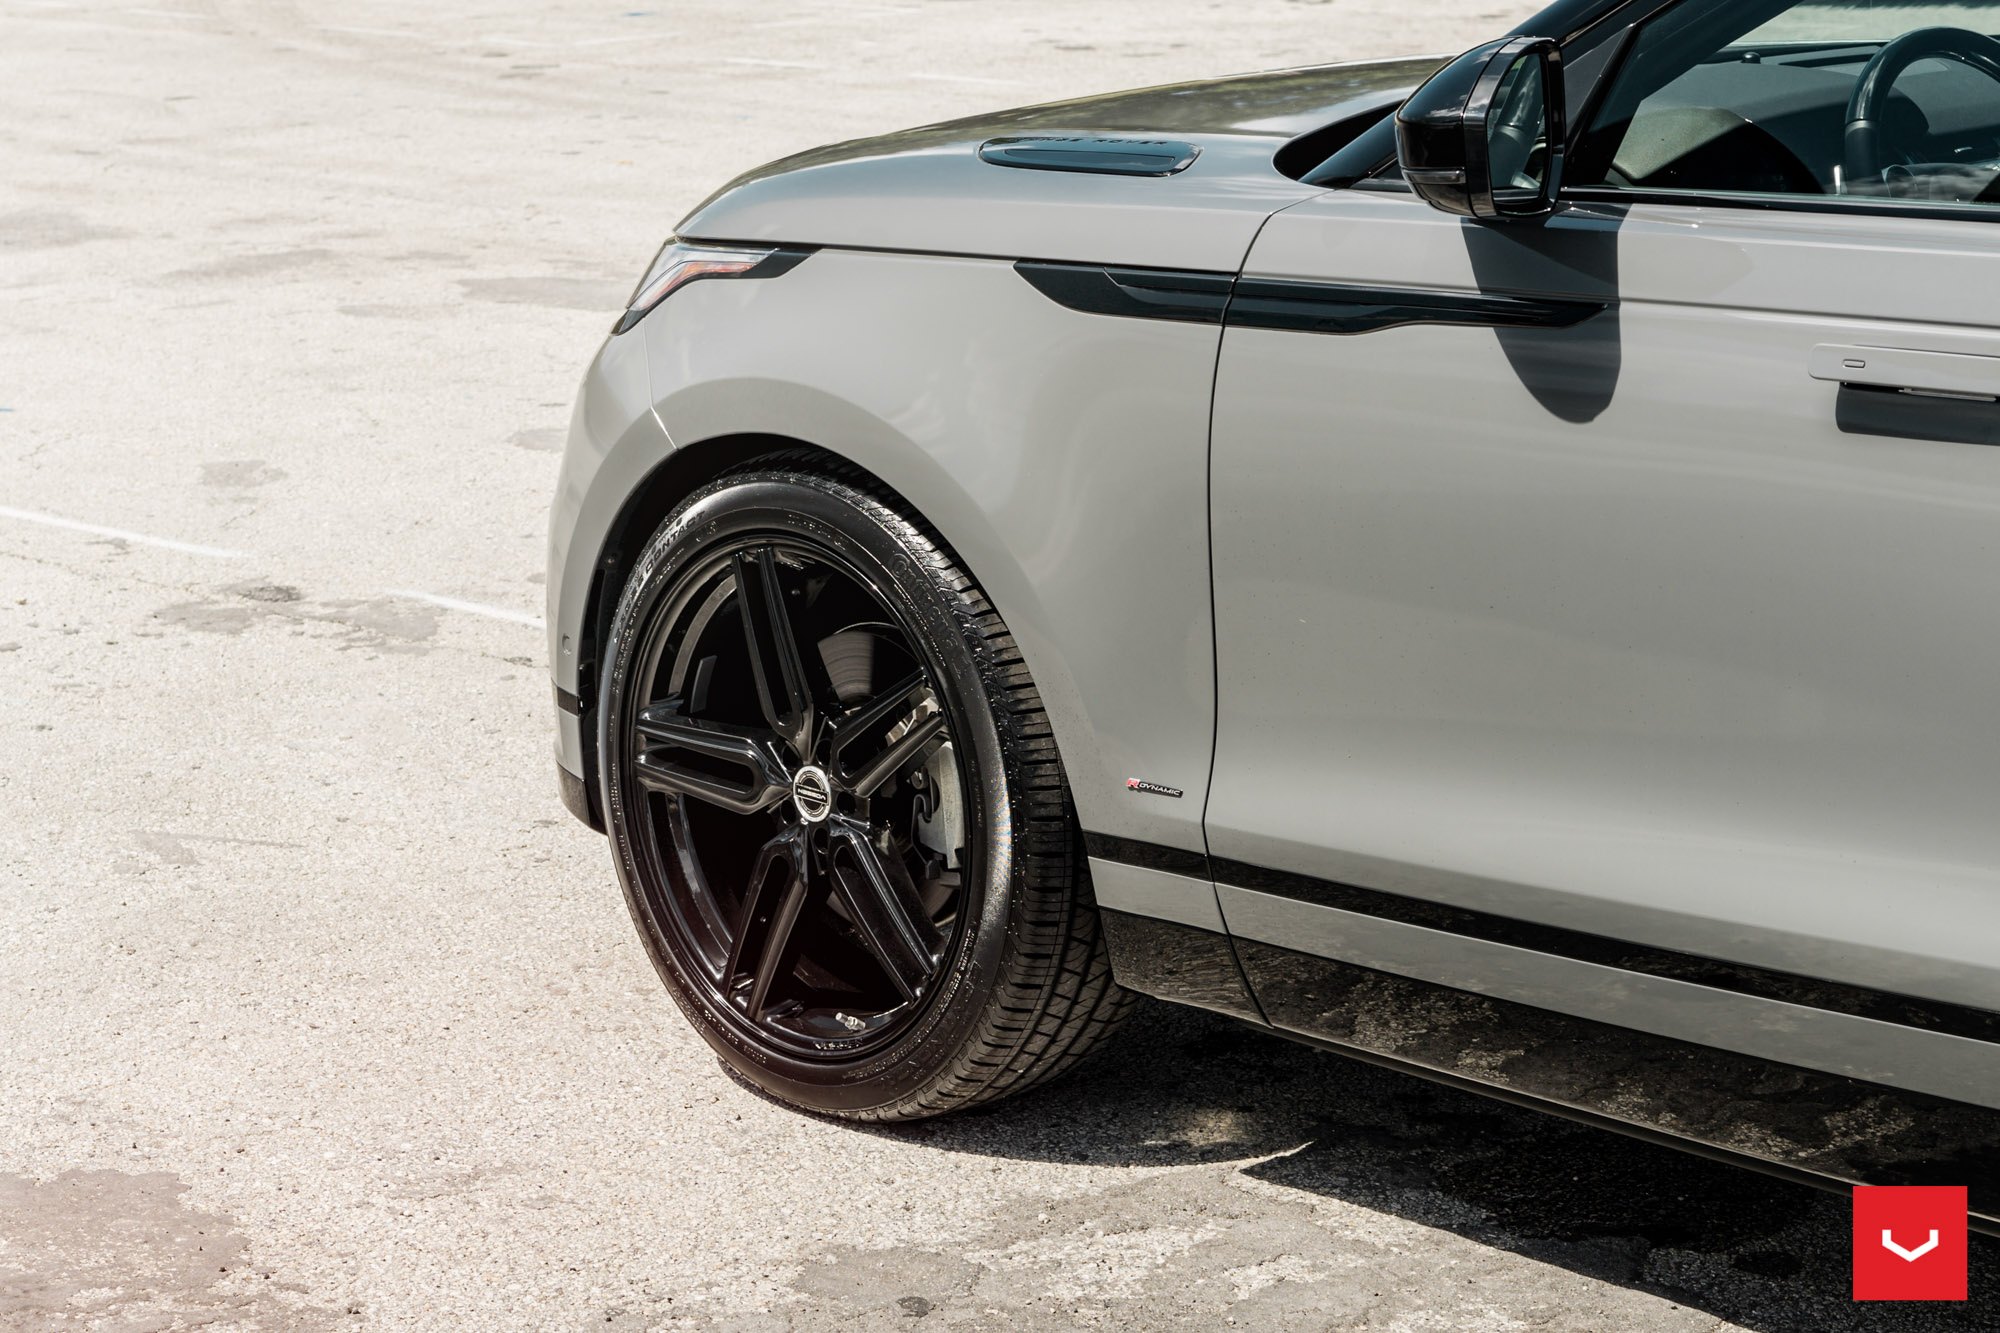 Gray Range Rover Velar with Aftermarket Side Skirts - Photo by Vossen